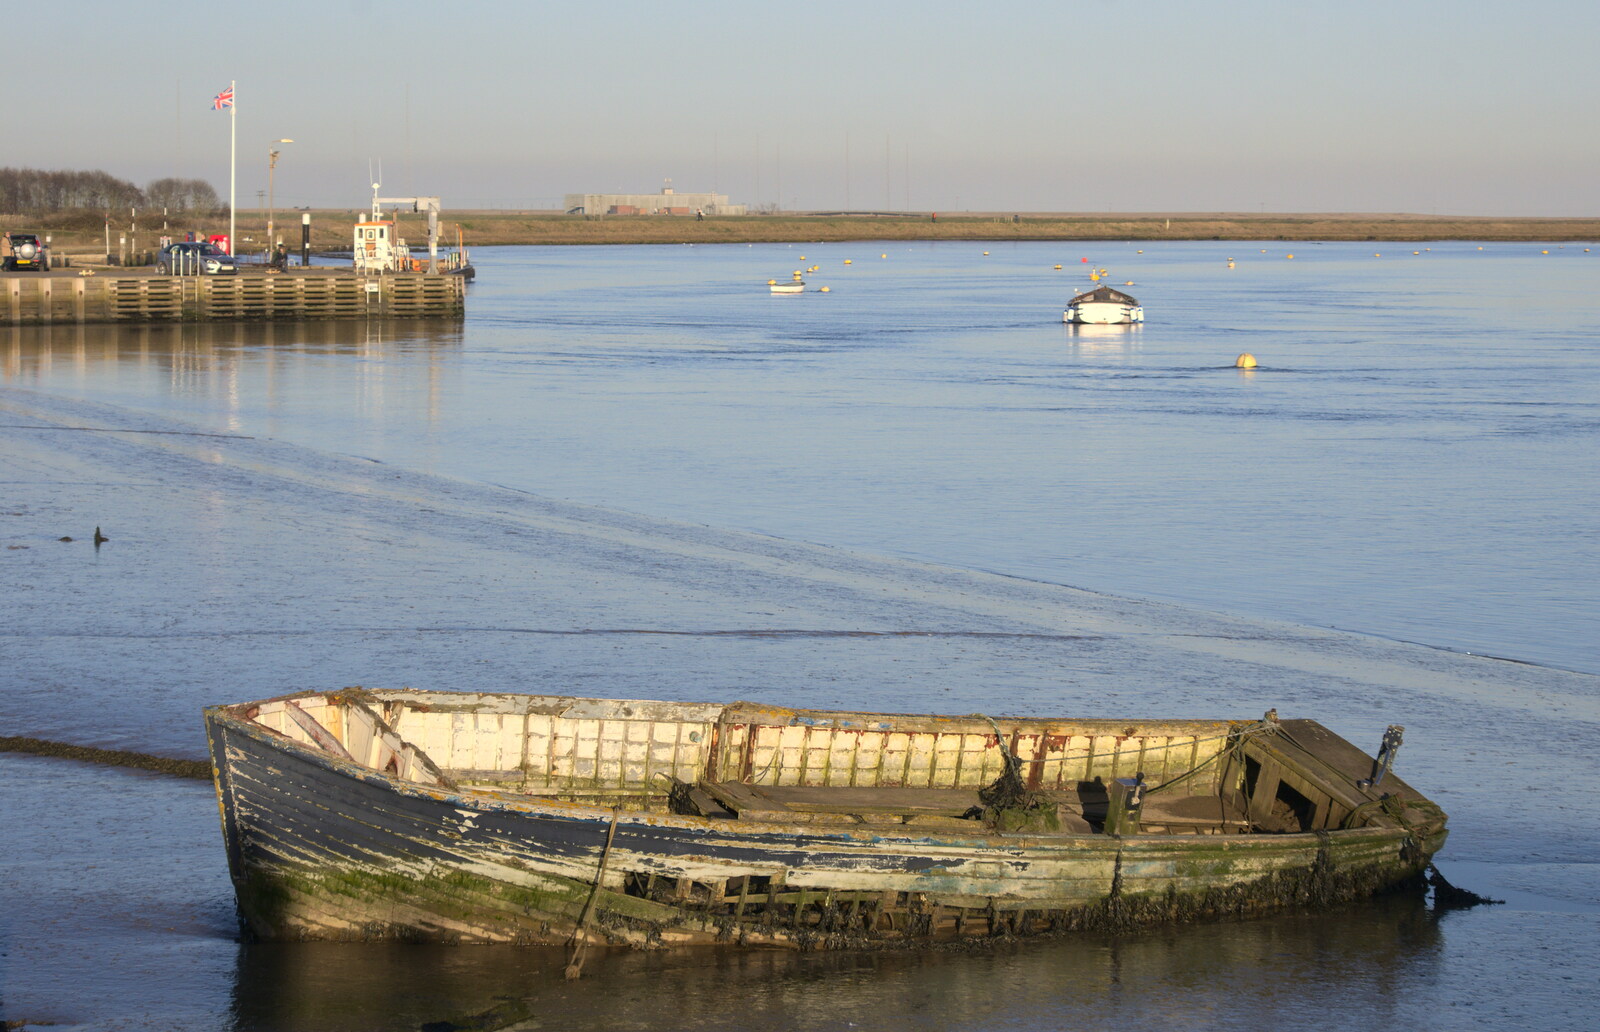 A wrecked boat from An Orford Day Out, Orford, Suffolk - 17th February 2018